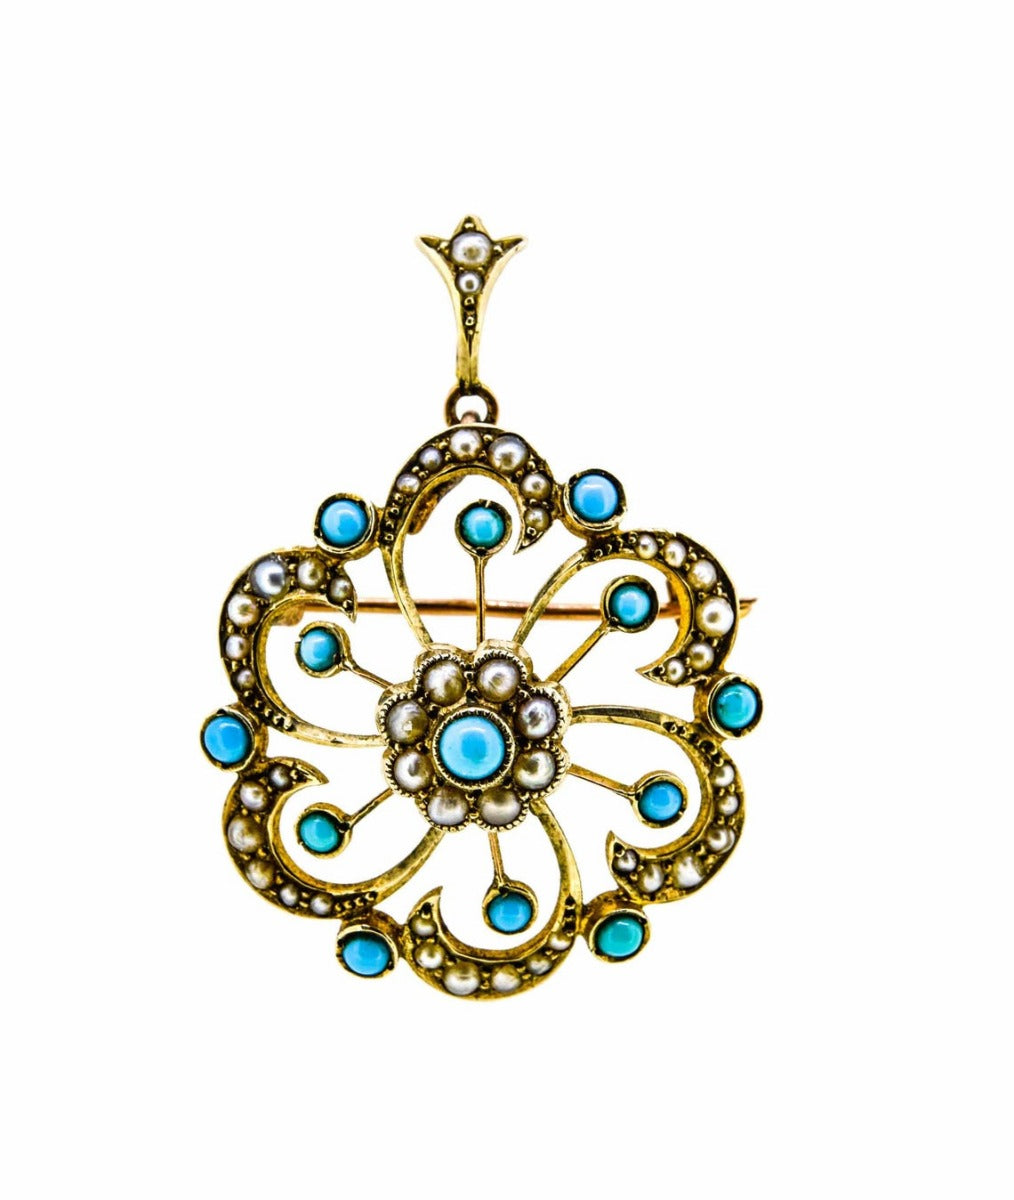 Victorian 9ct Gold Turquoise & Pearl Brooch / Pendant